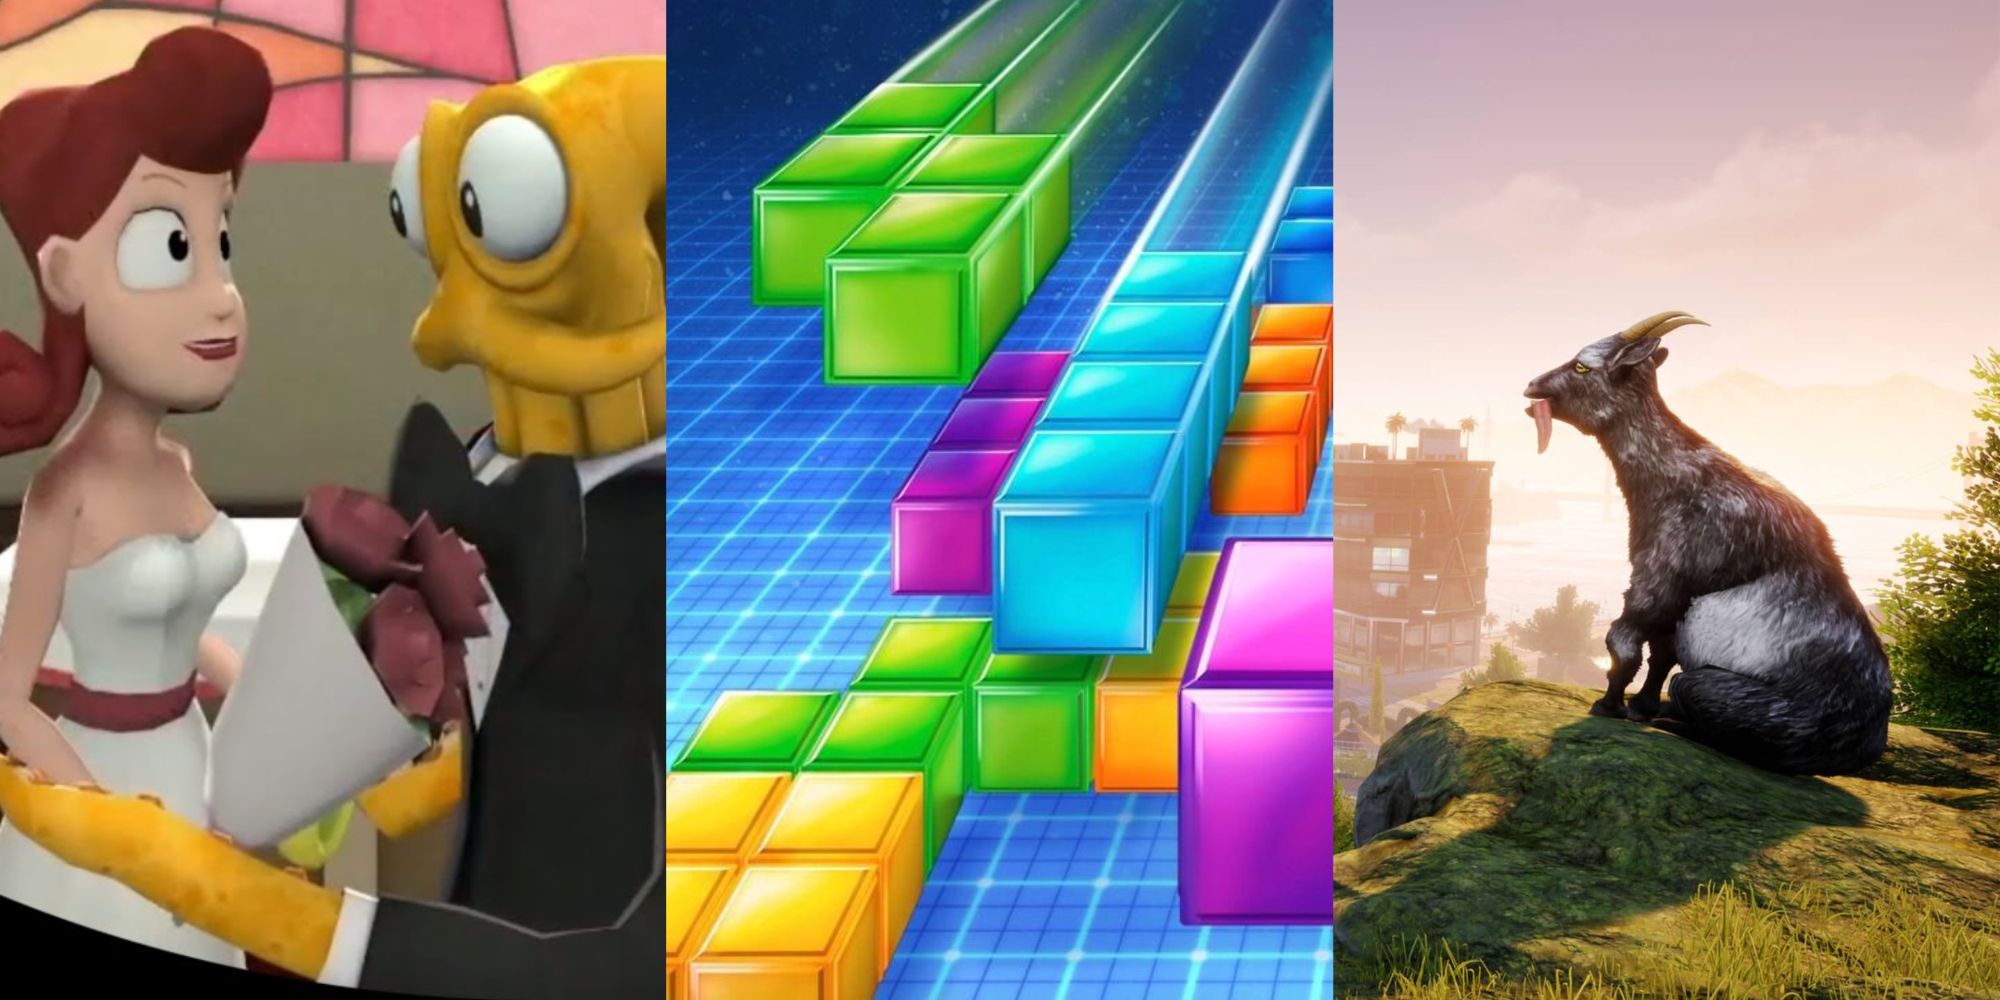 Games I'm Shocked Haven't Been Made Into Movies Featured - Octodad, Tetris, Goat Simulator